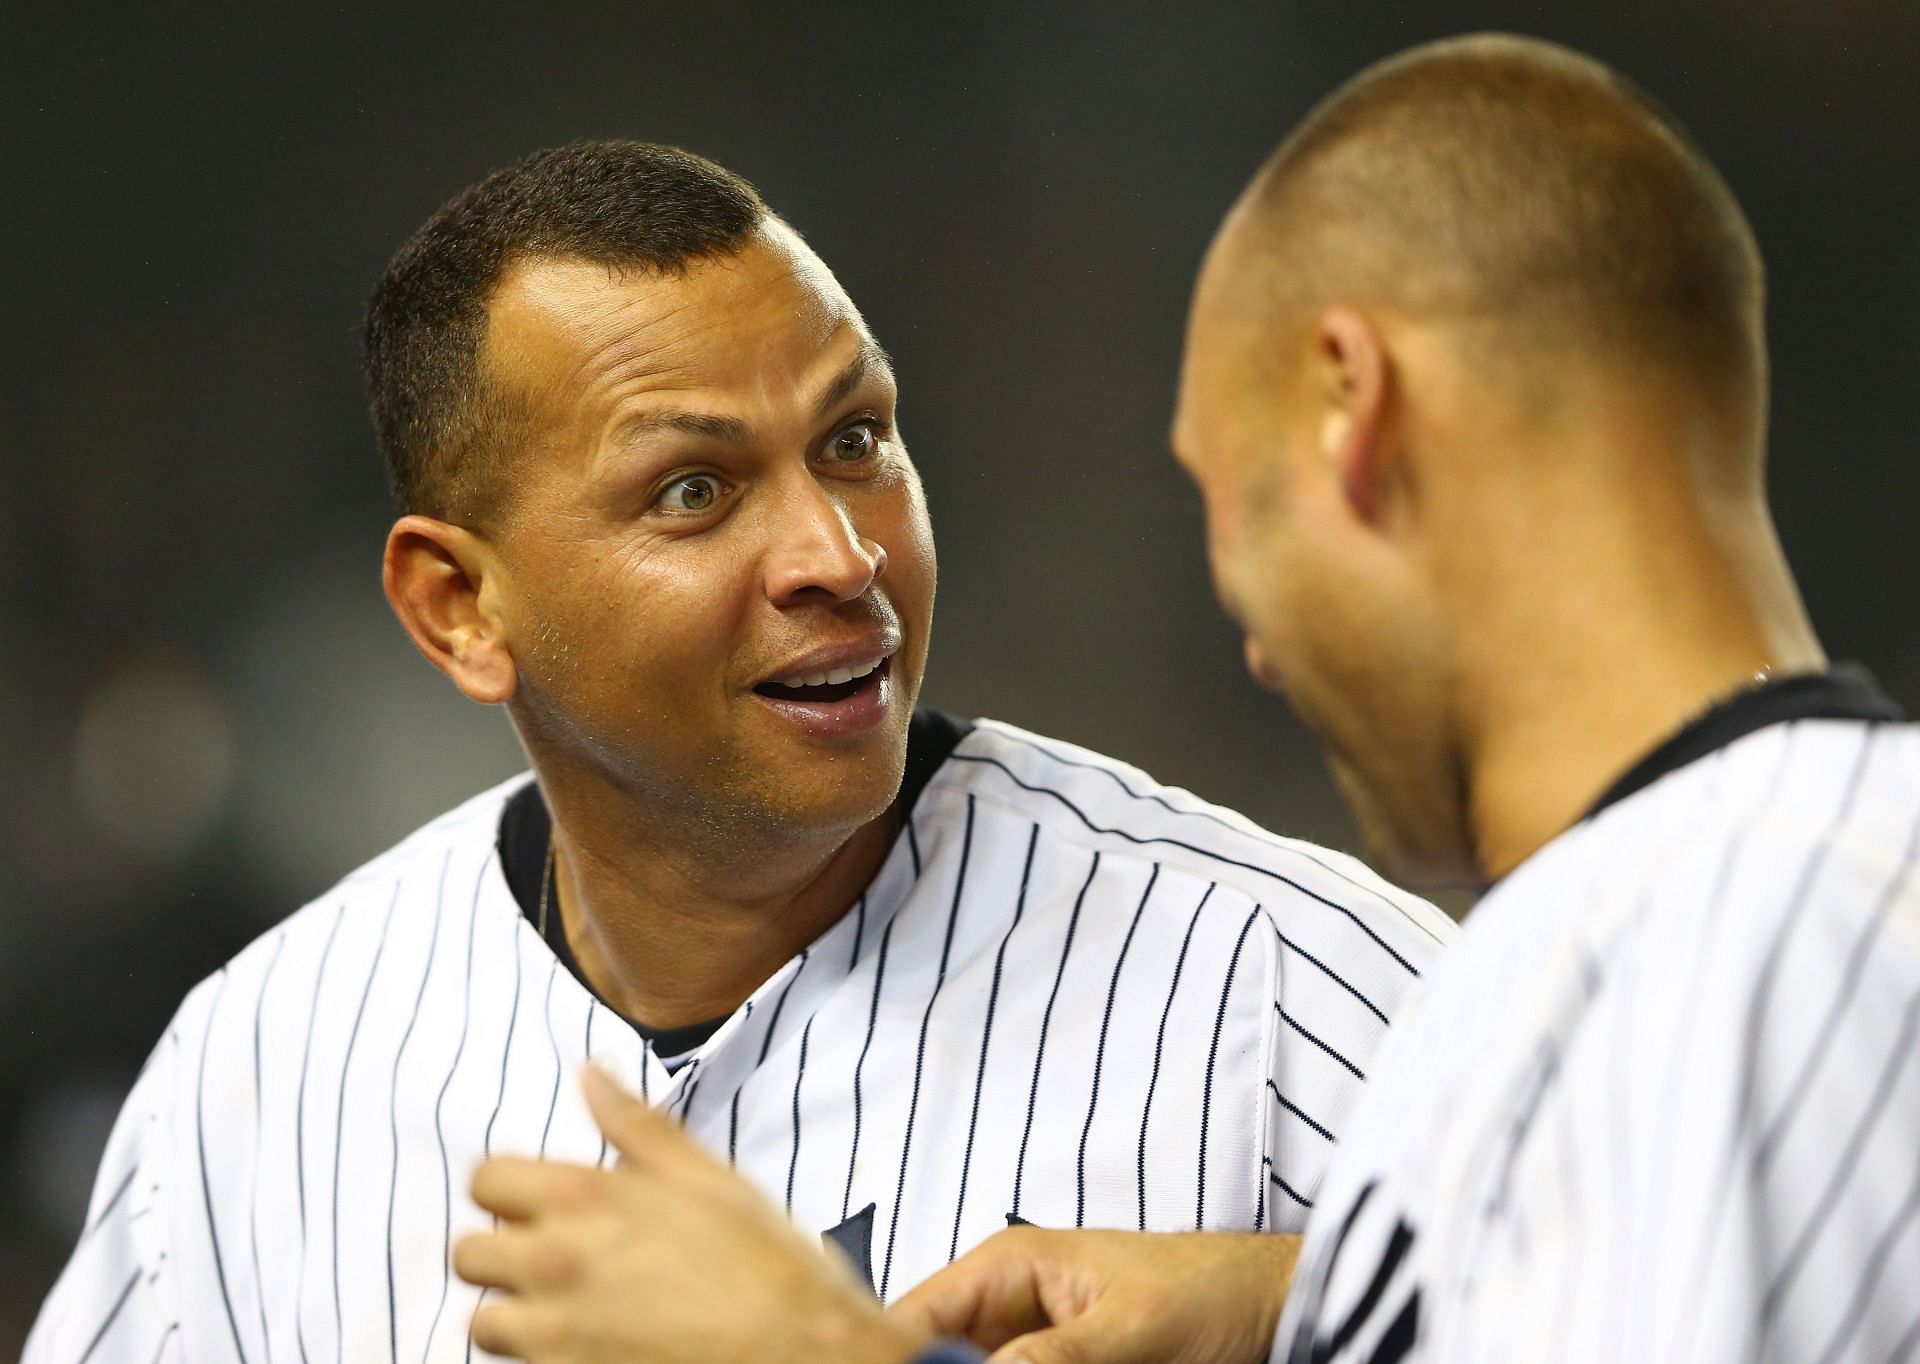 A-Rod and Jeter interact during a Boston Red Sox v New York Yankees game.